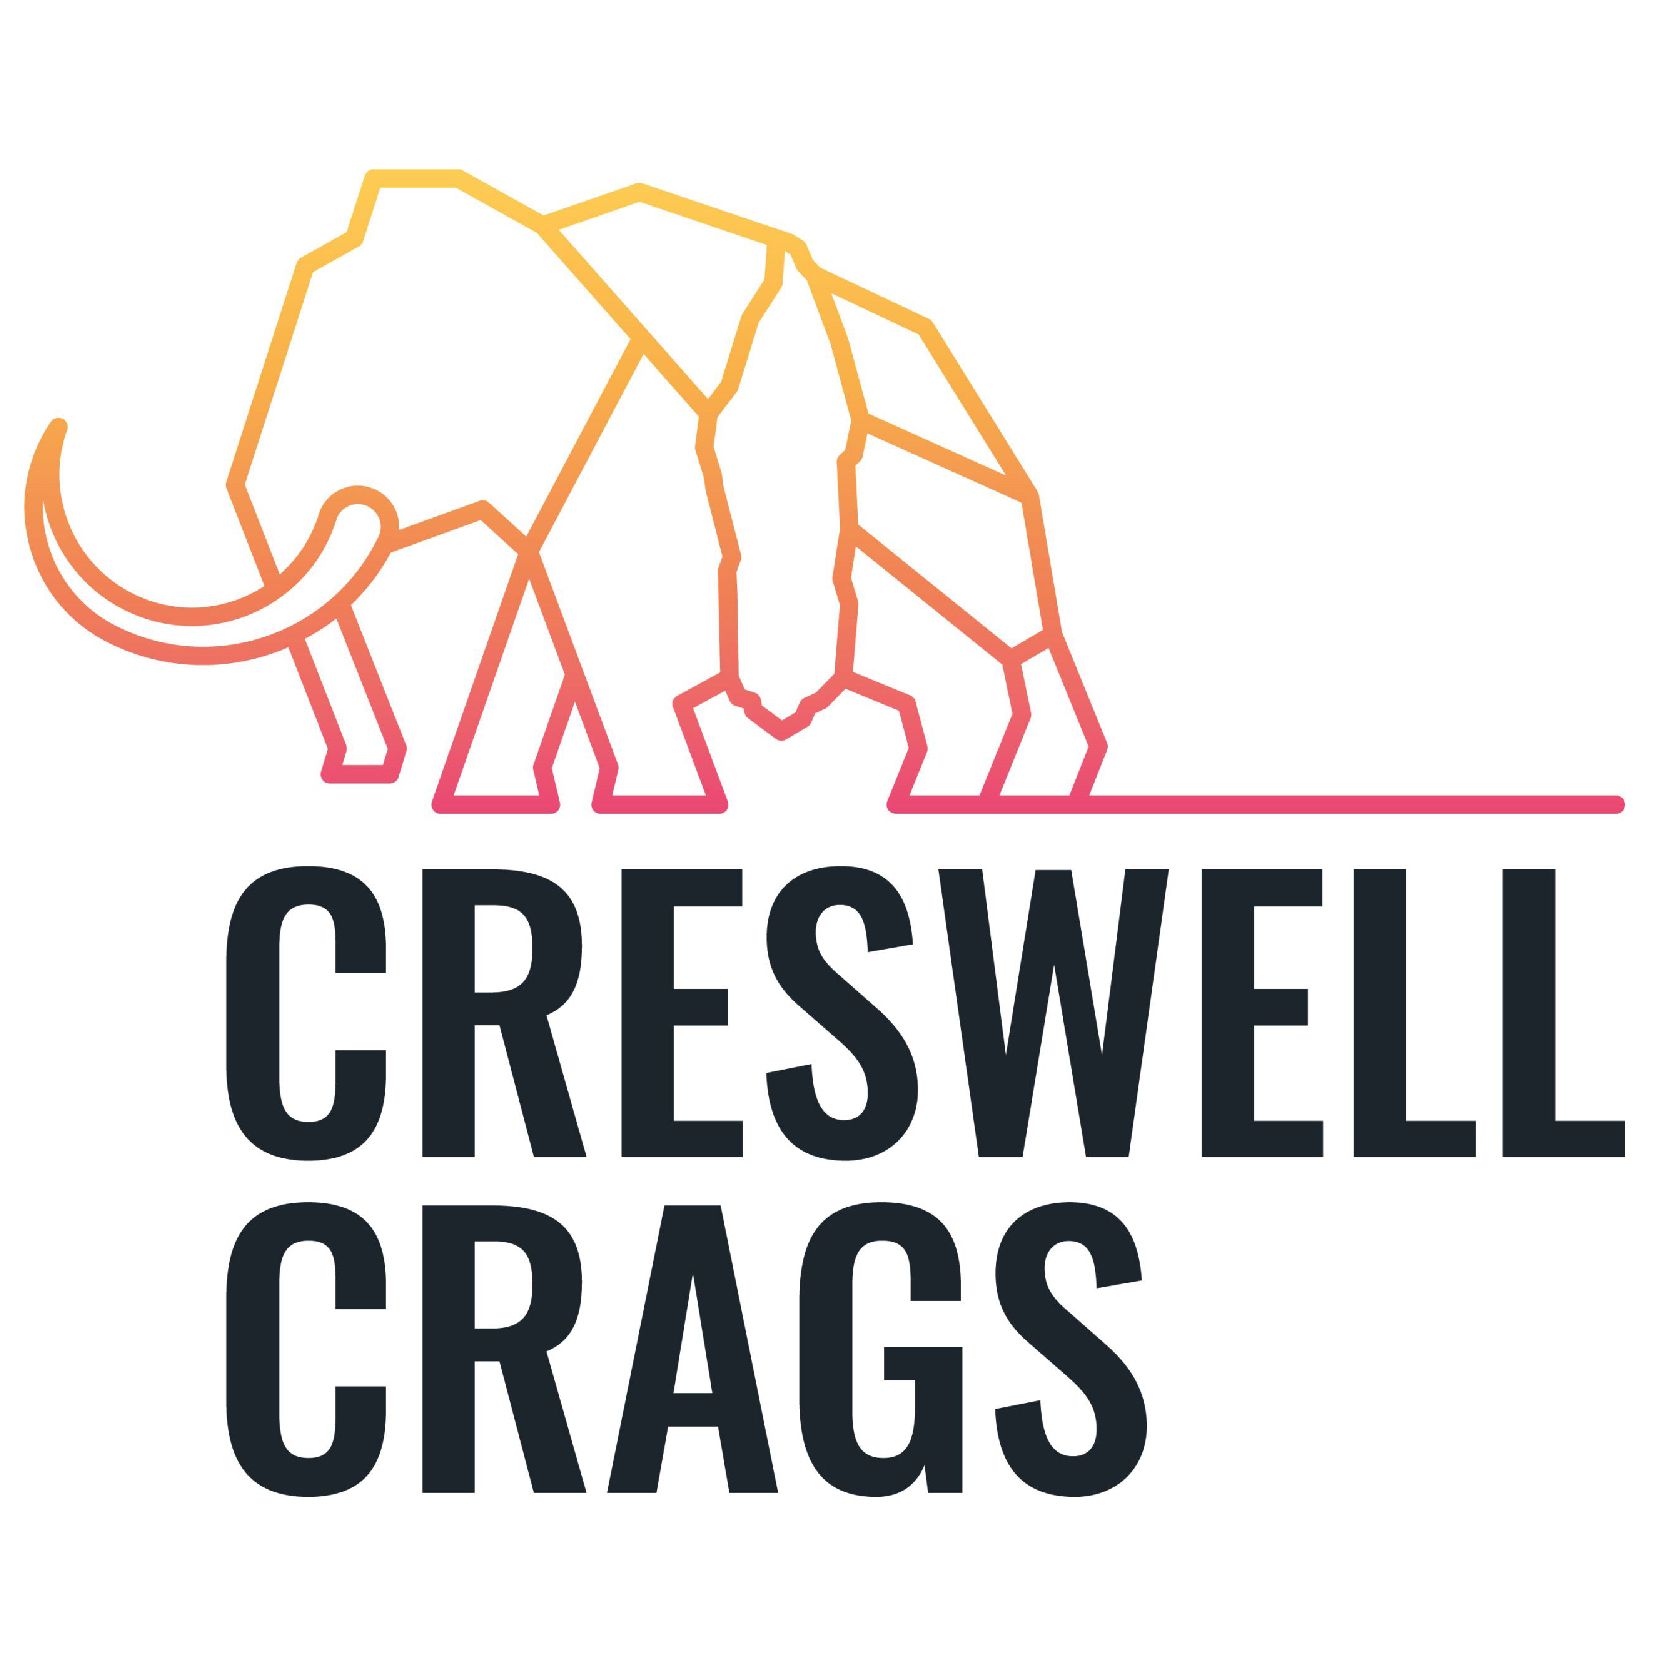 Creswell Crags square logo